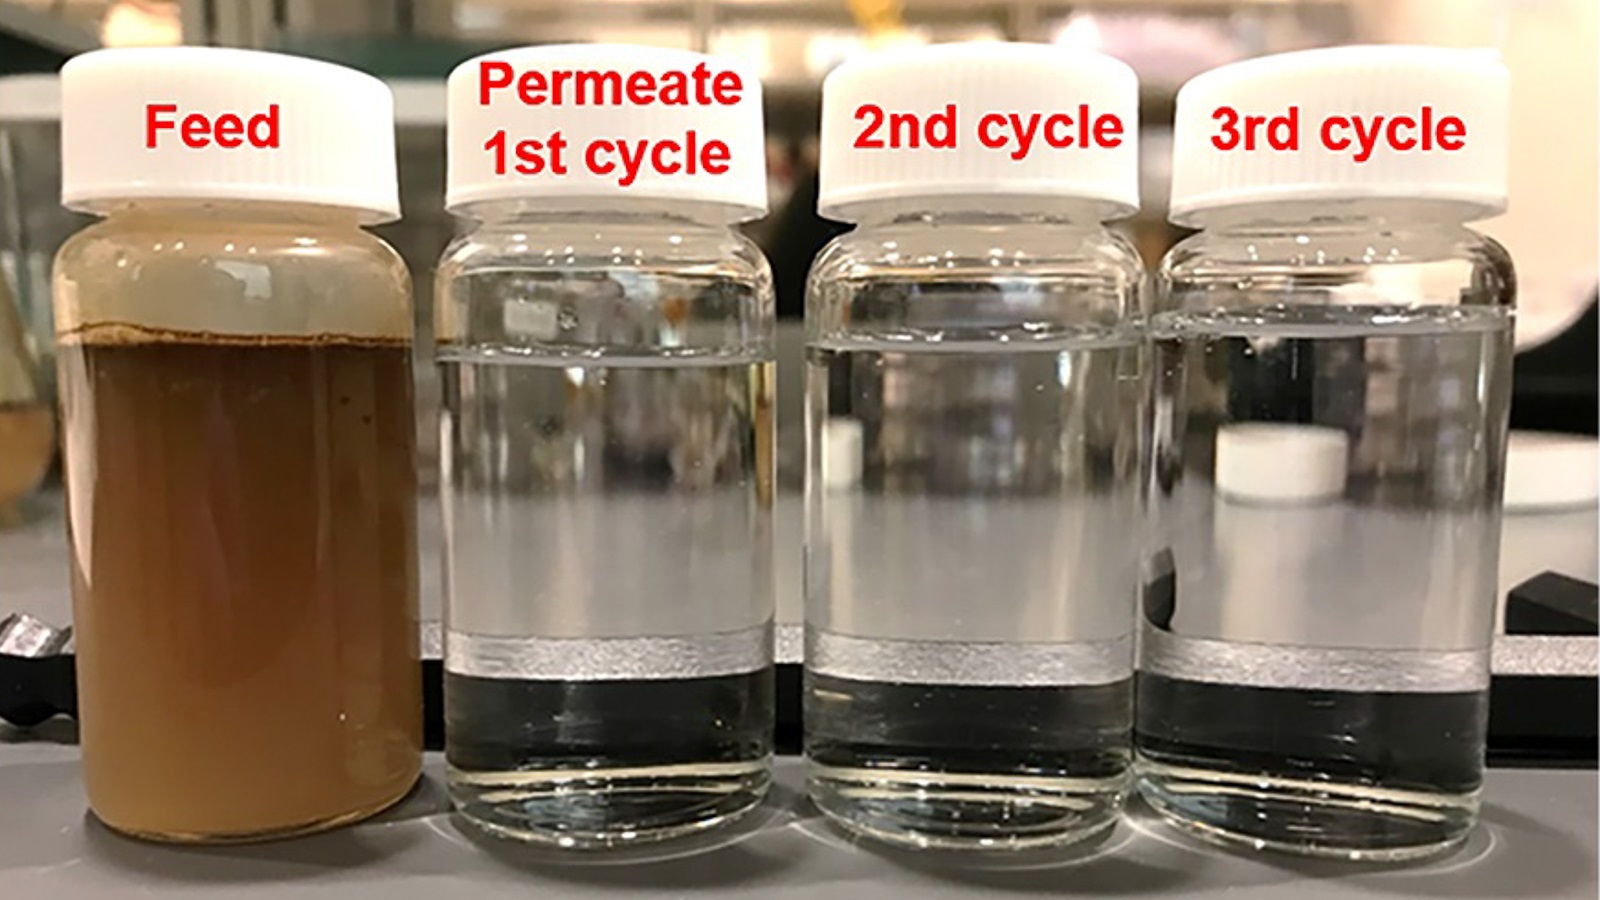 Crude-oil-in-water feed in its initial state and the clean permeate that comes out after passing through the ALD-treated membrane, a process that was performed three successive times. The membrane was simply rinsed by water after every cycle of filtration. (Image by Argonne National Laboratory.)